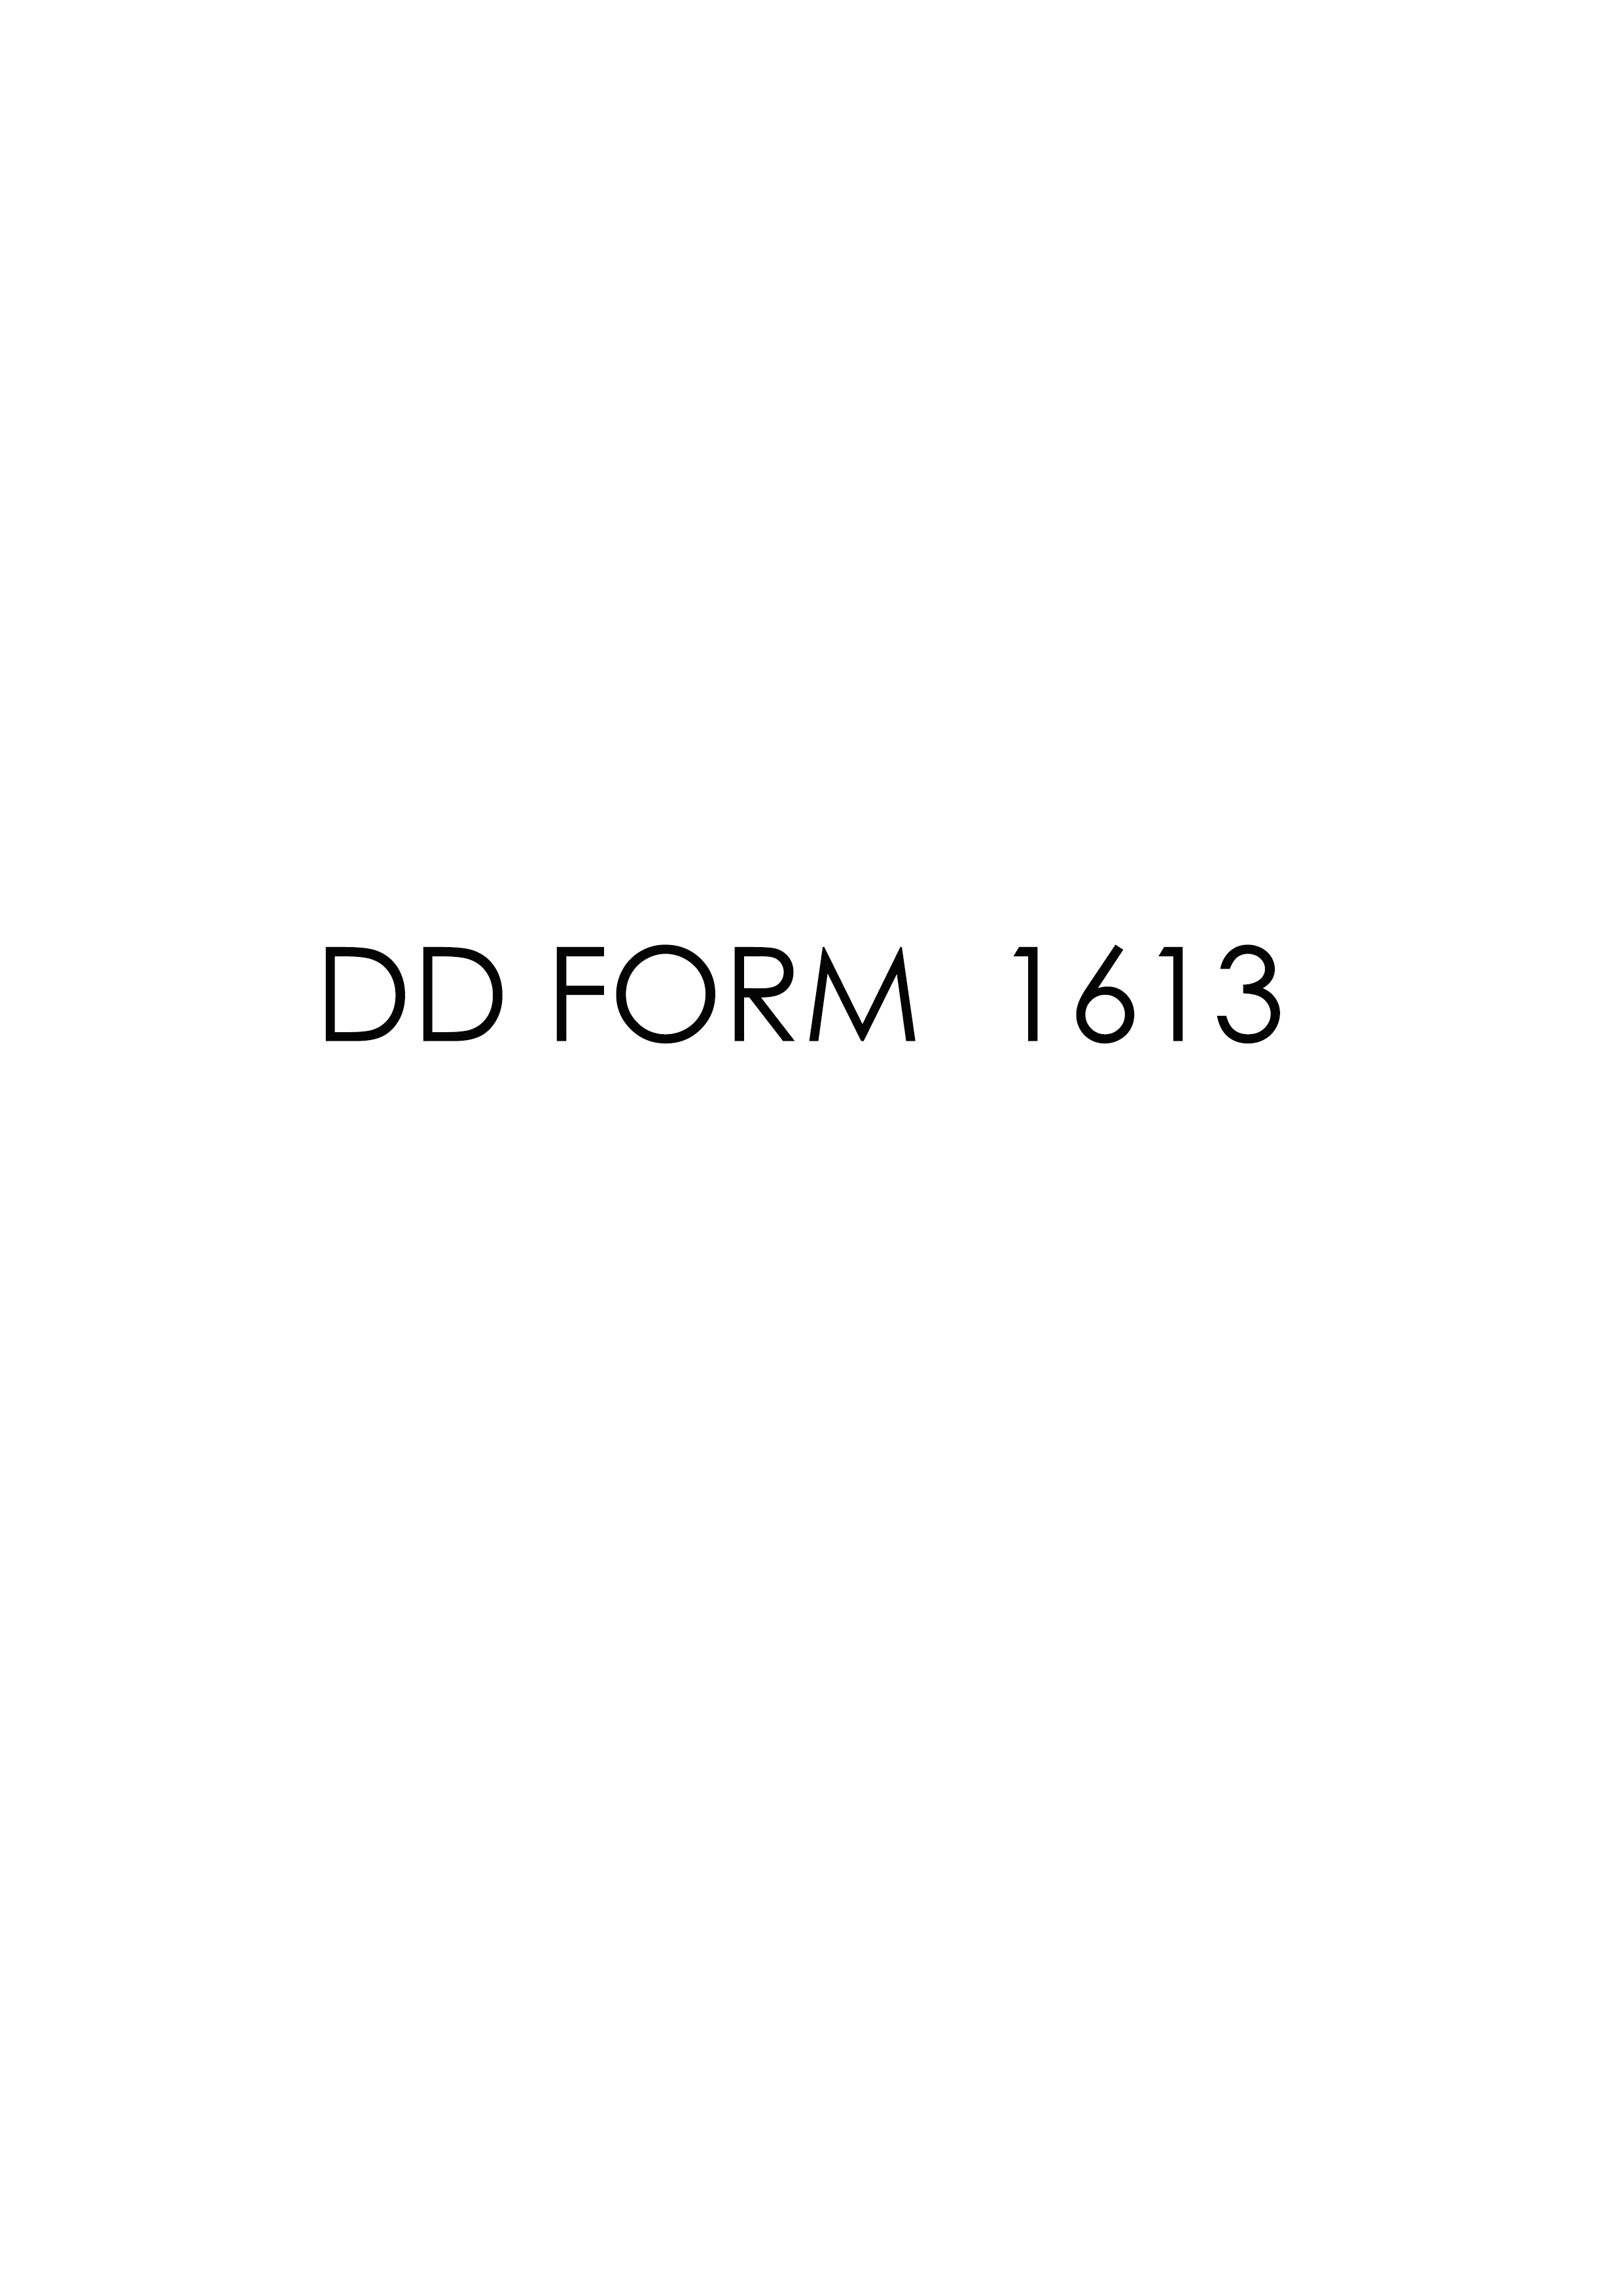 Download Fillable dd Form 1613